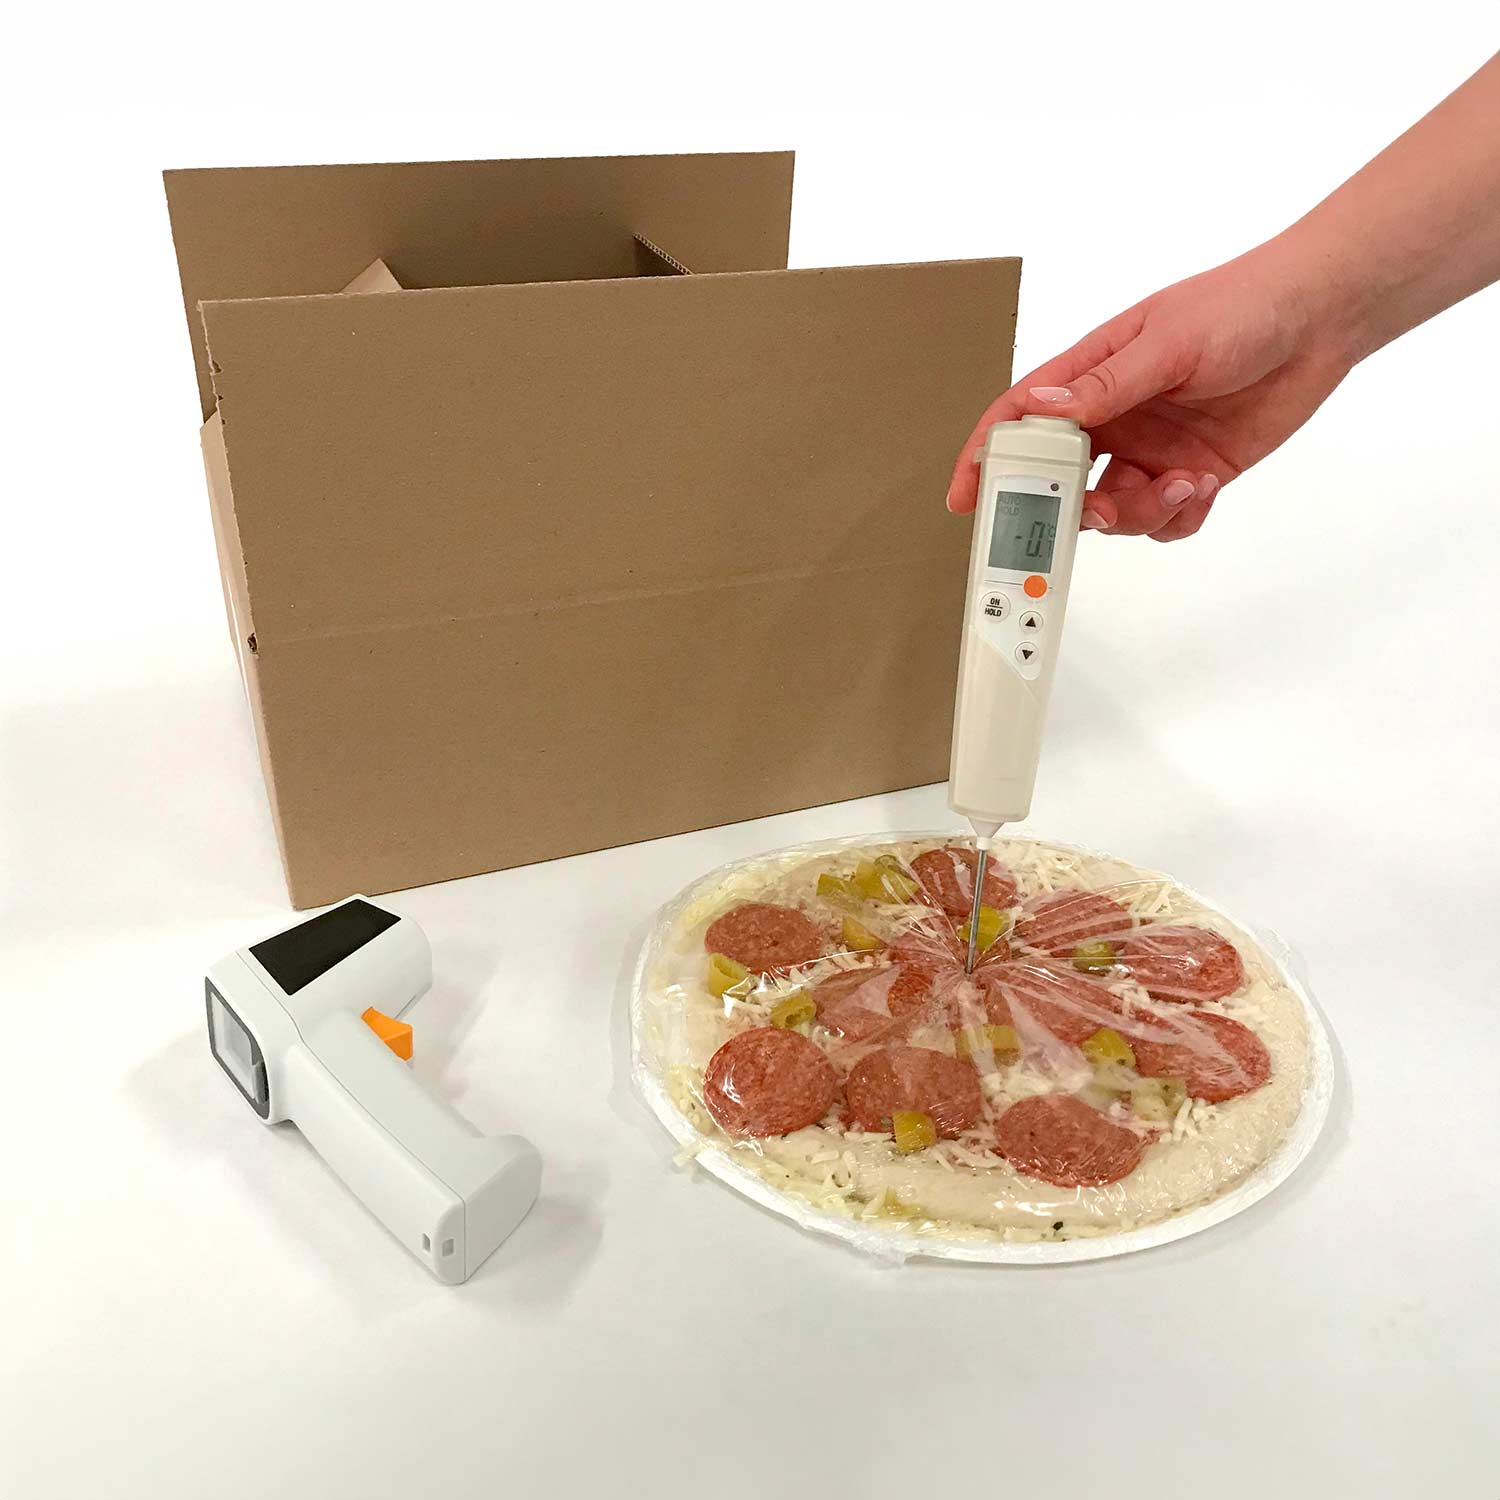 Practical test for food shipping